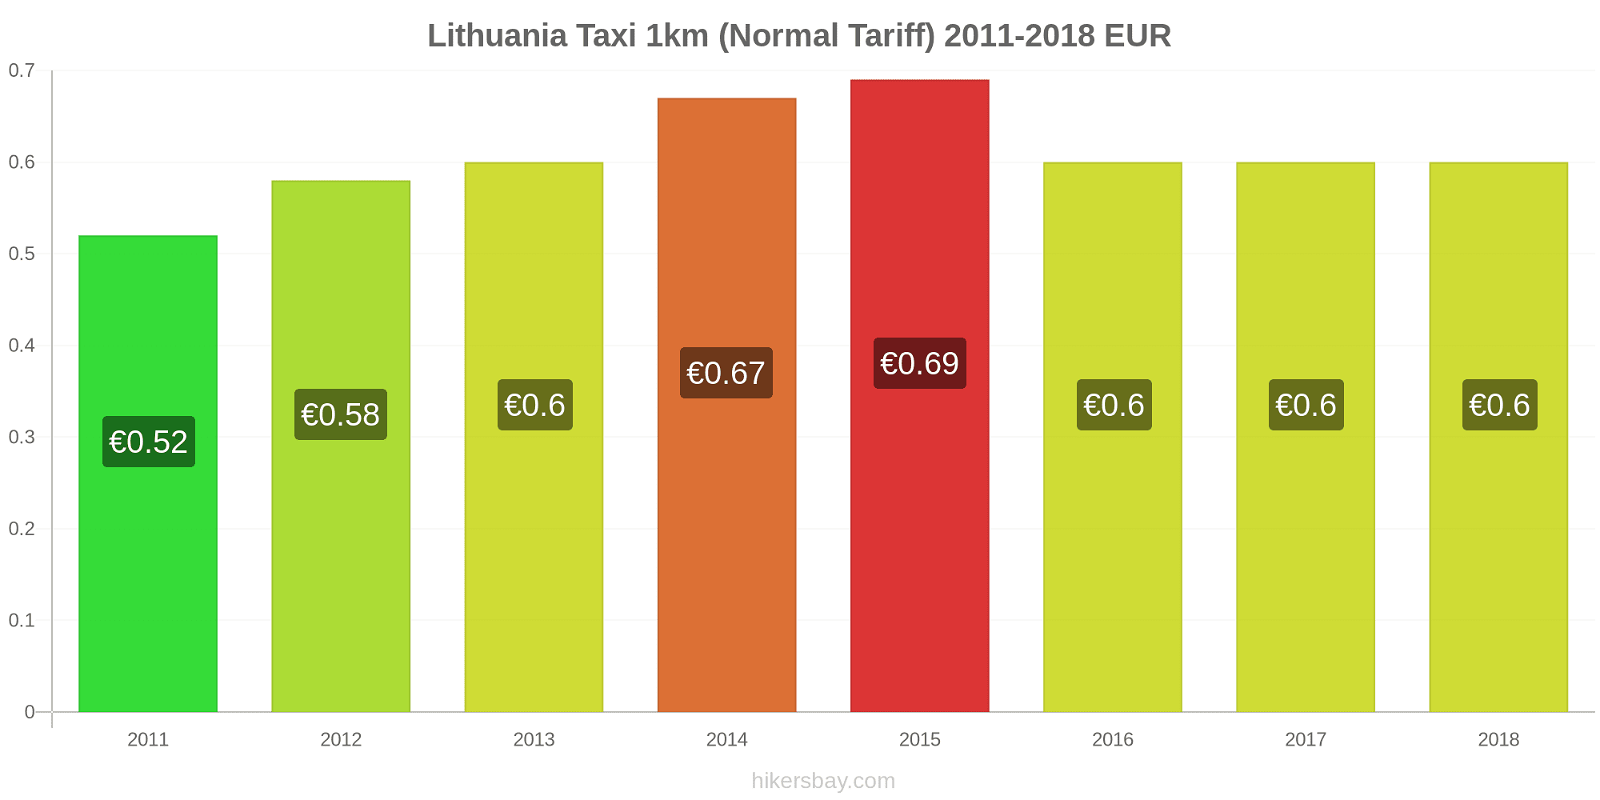 Lithuania price changes Taxi 1km (Normal Tariff) hikersbay.com